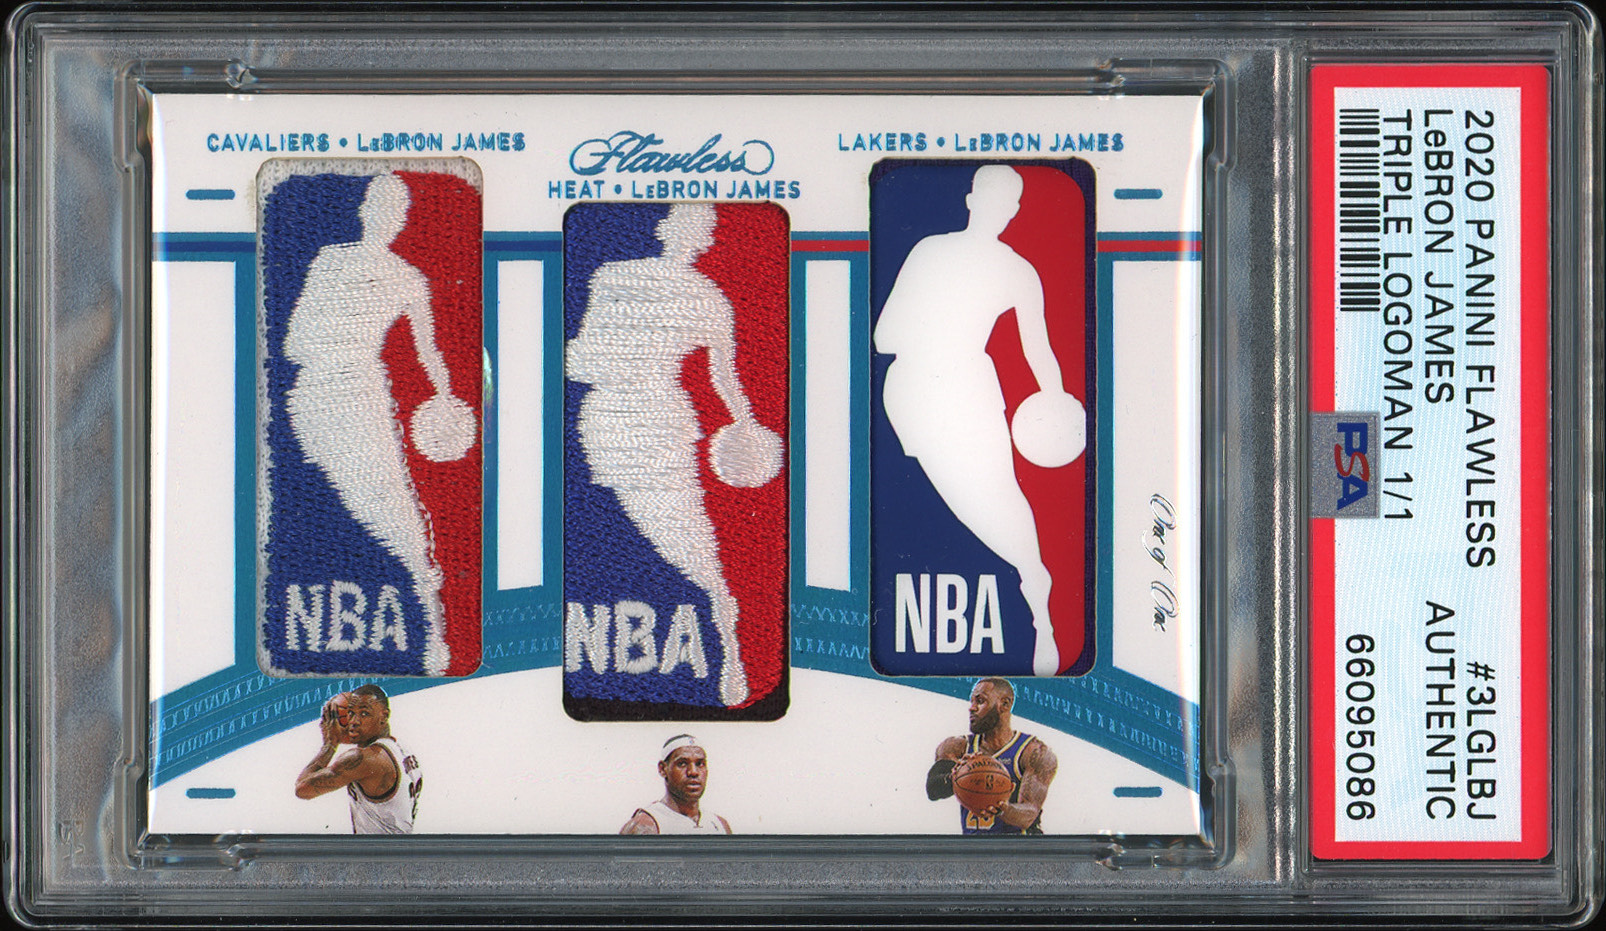 LeBron James trading card sells for record $1.8 million